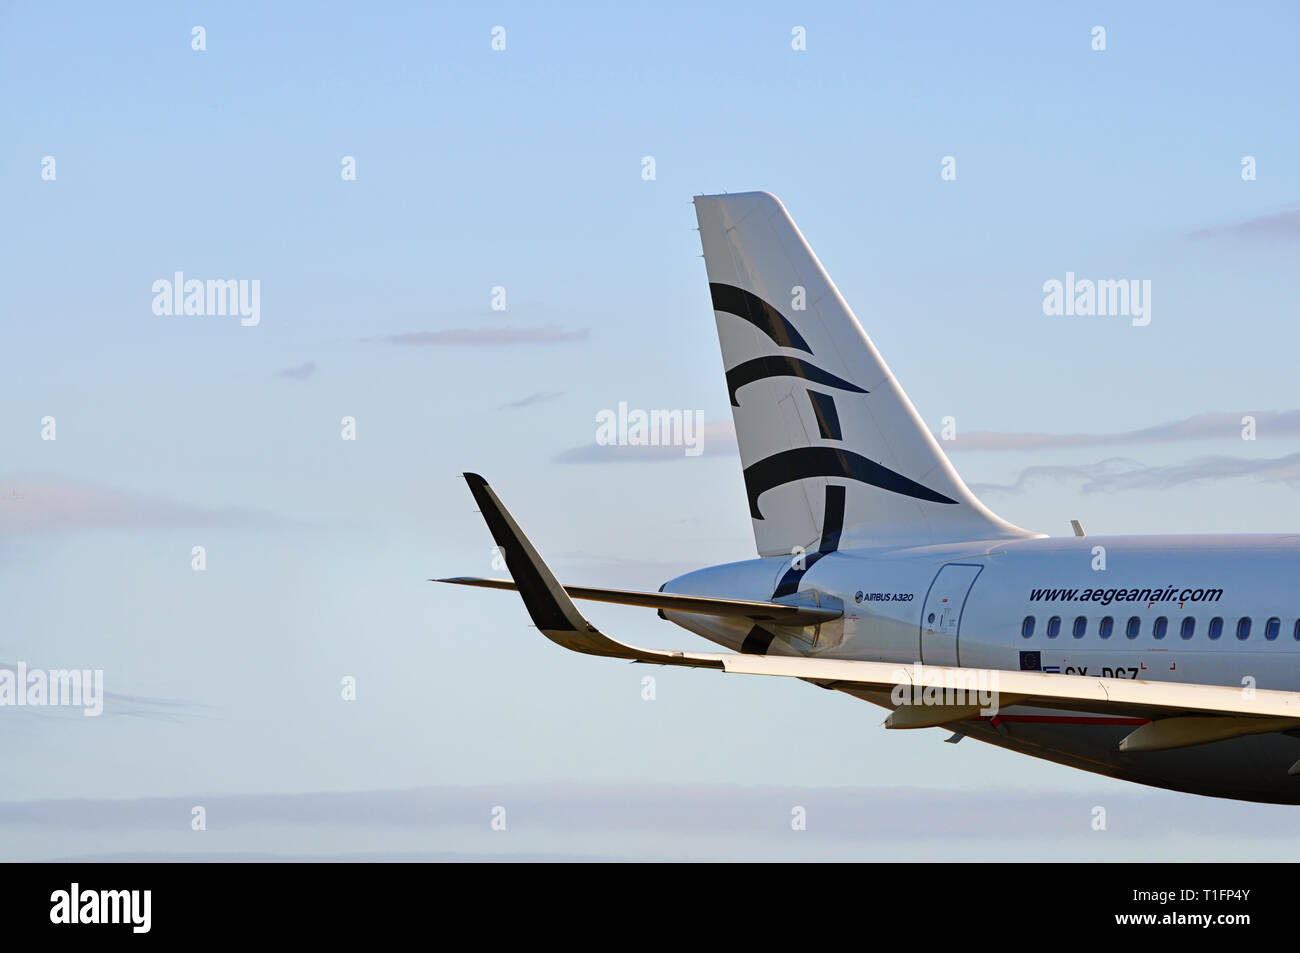 Manchester Airport, United Kingdom - January 8, 2018: Aegean Airlines Airbus A320-232 MSN 6643 SX-DGZ moments after take off. Stock Photo